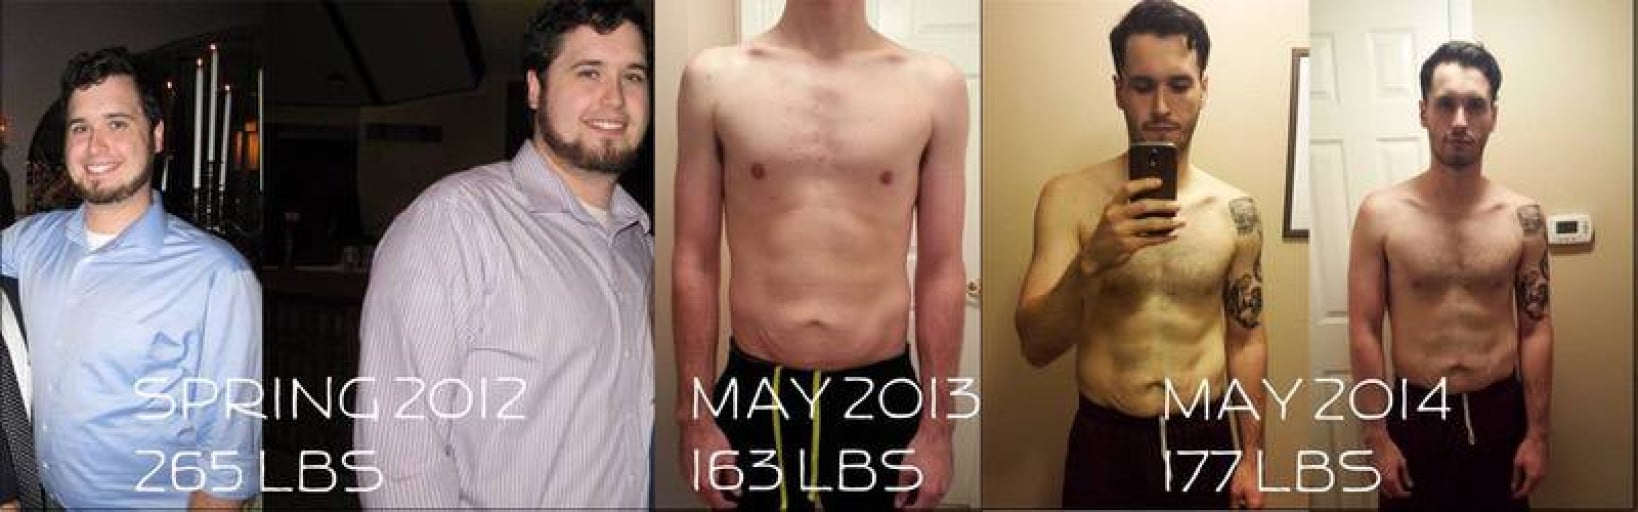 A before and after photo of a 6'1" male showing a weight reduction from 265 pounds to 163 pounds. A net loss of 102 pounds.